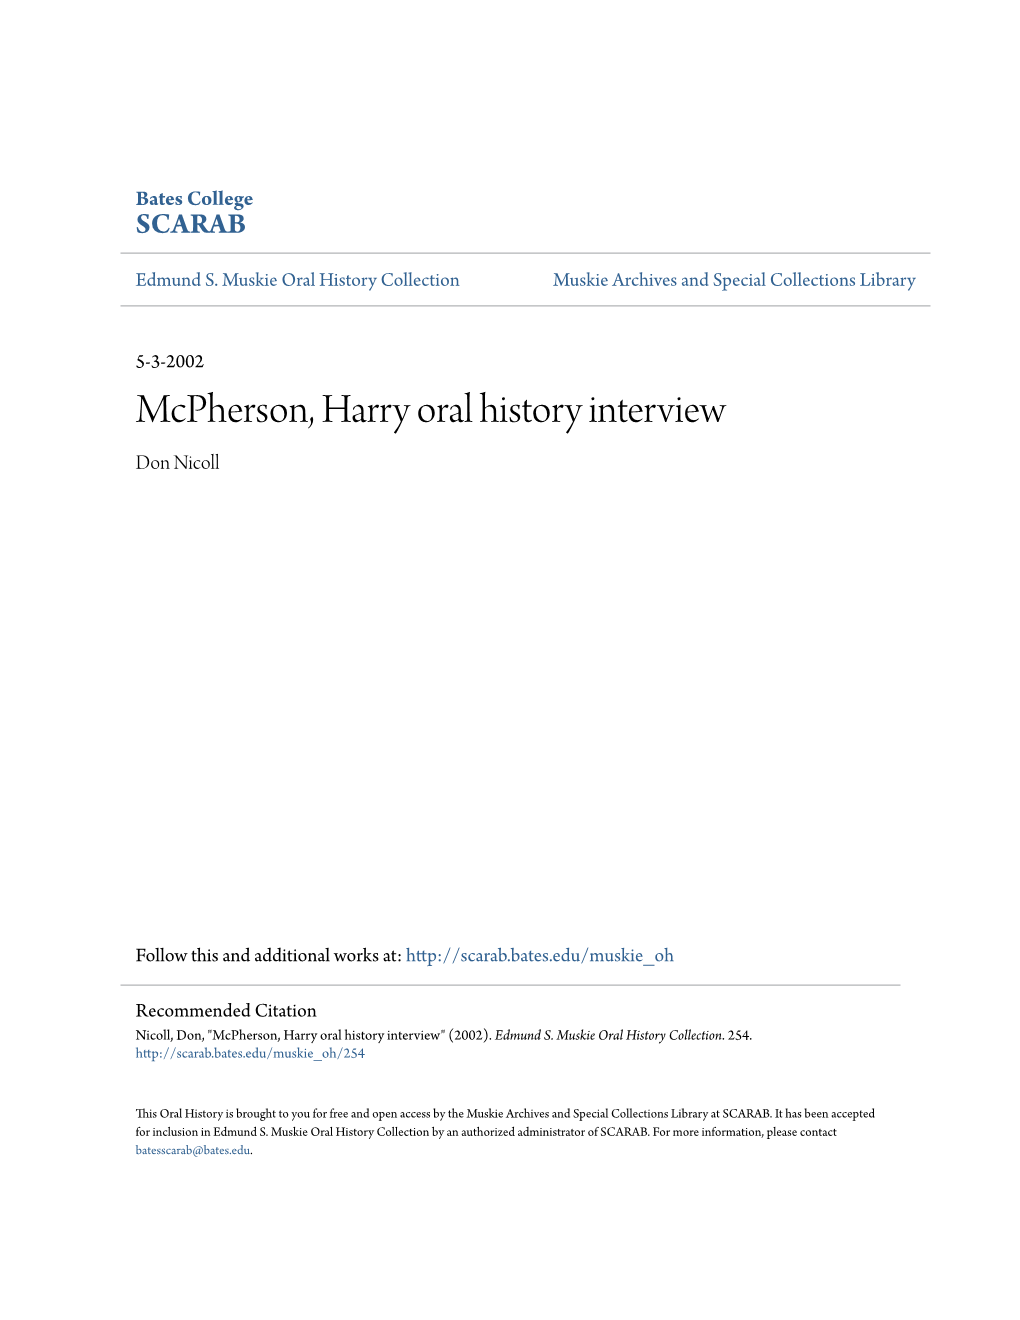 Mcpherson, Harry Oral History Interview Don Nicoll